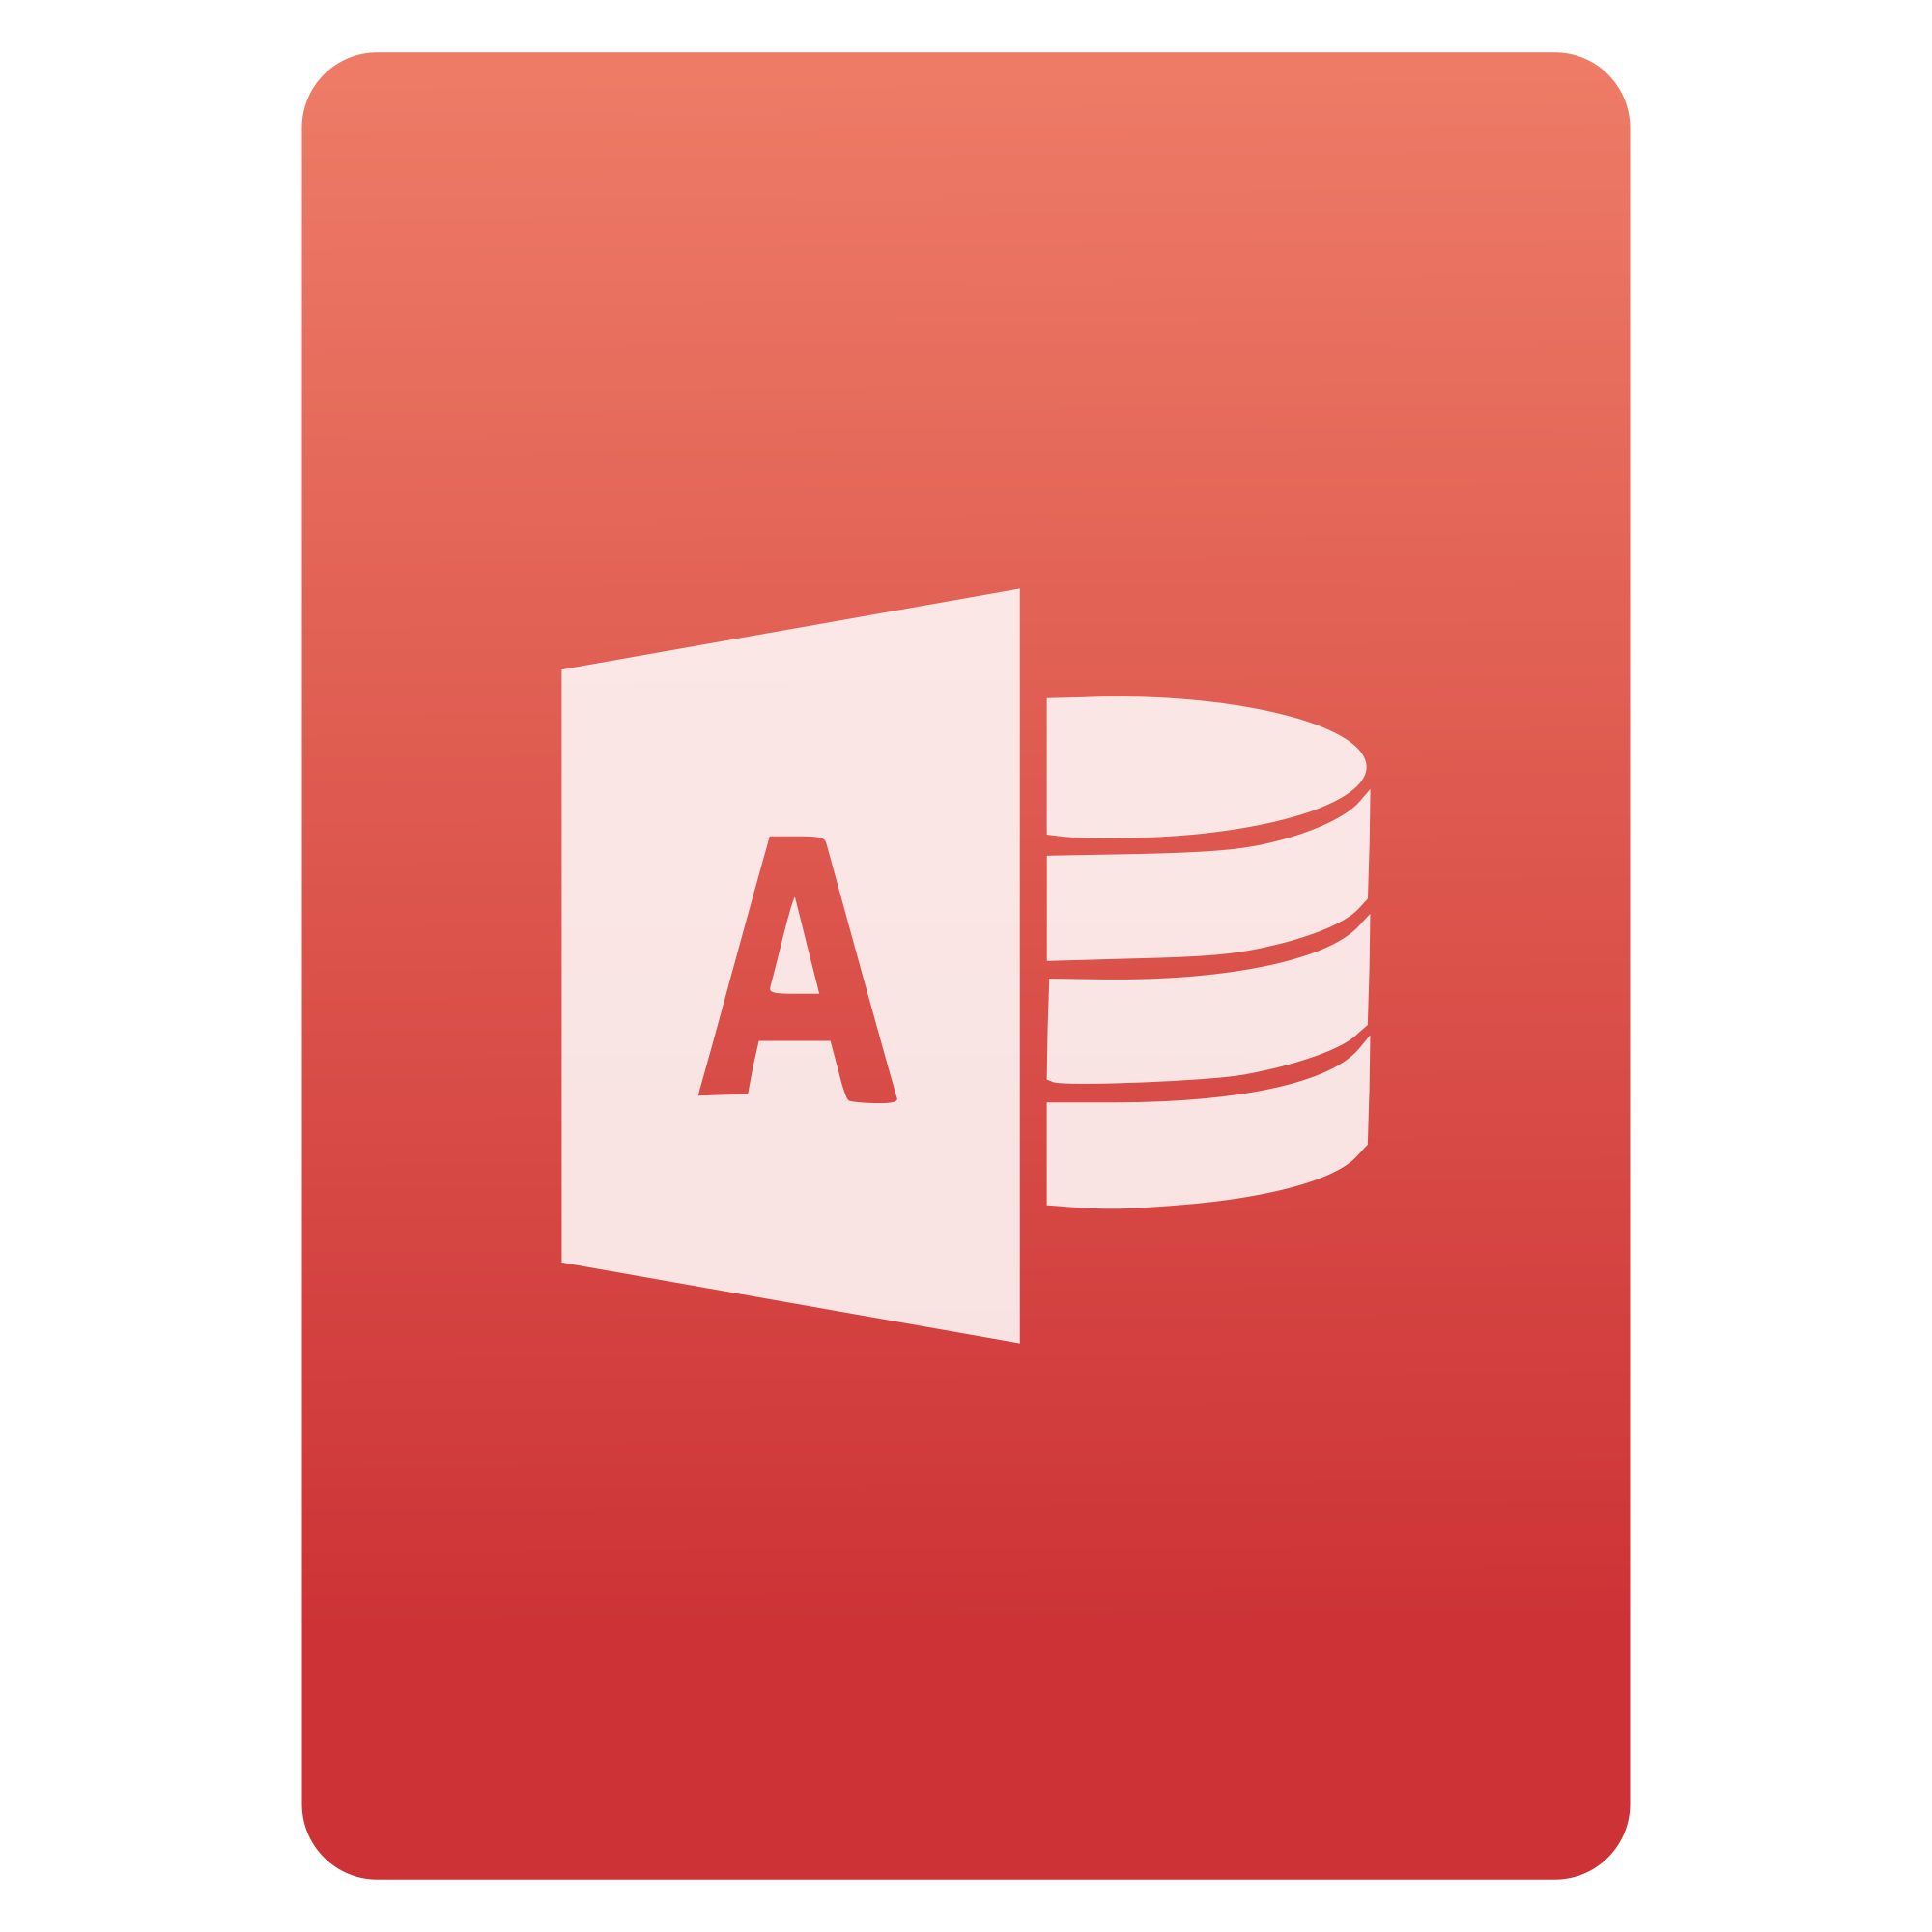 Ms Access Png Transparent Image | Png Mart - Microsoft Access, Transparent background PNG HD thumbnail